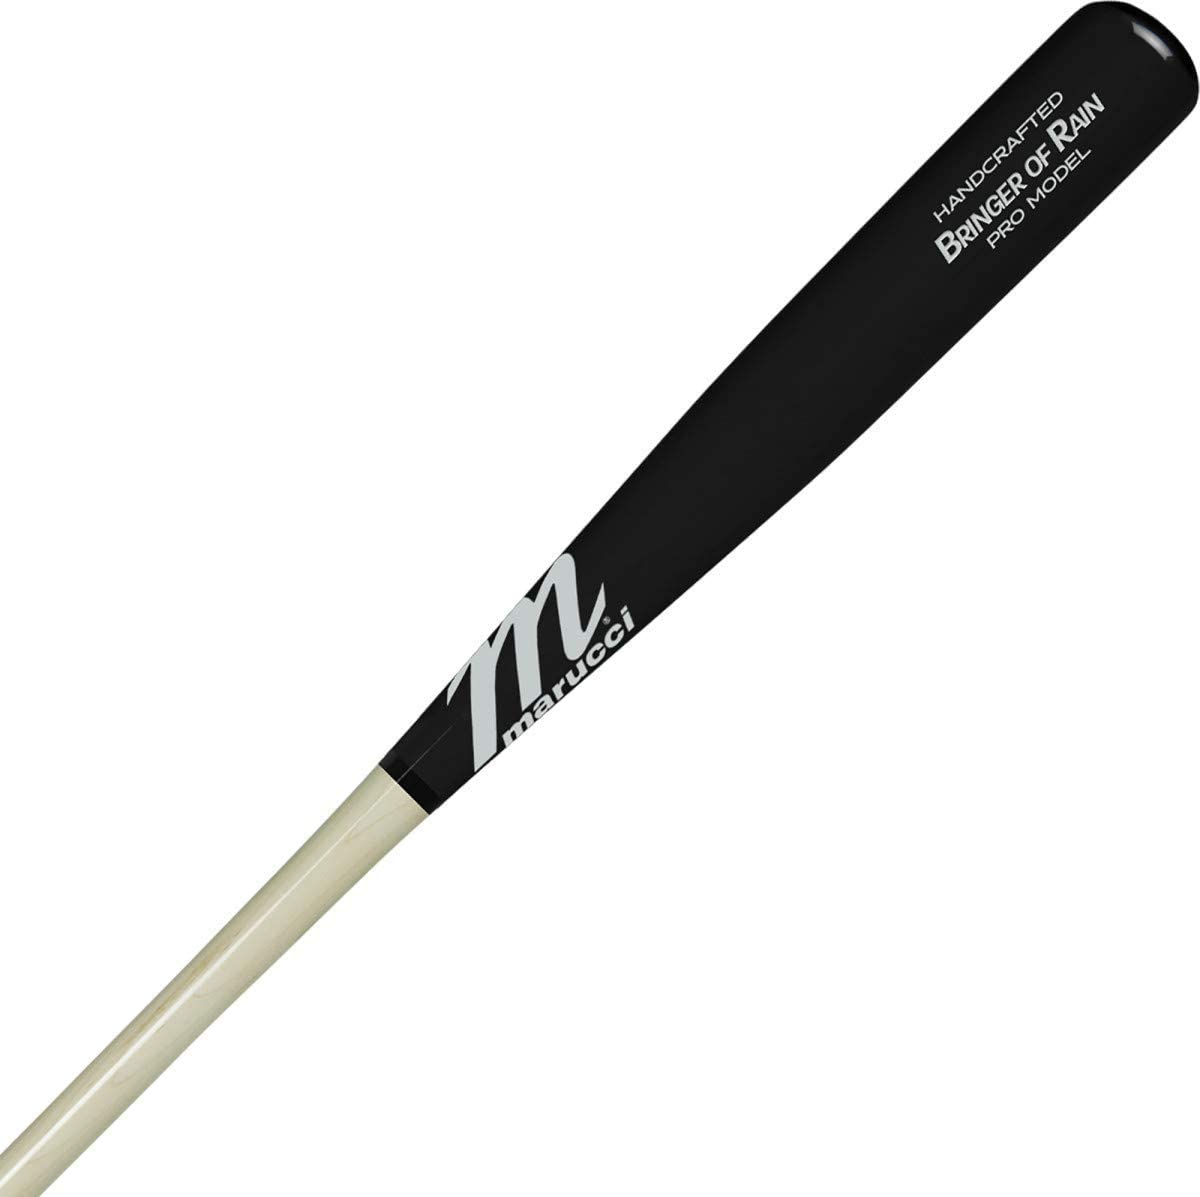 The Marucci Bat Company uses top grade Maple billets cut from selected, naturally grown trees in Pennsylvania forests. This selection process insures the highest possible grade of wood for each bat. The Marucci Bat Company™ bats are 100 percent handmade or turned in small batches from an original design, then finished and detailed by hand. Each model is made to exacting specifications maximizing balance and ease of handling. The Marucci Bat Company™ uses an Ultra Penetrating Stain that provides the best possible finish for your next Marucci Bat. Most impressive is the Bone Rubbing technique that The Marucci Bat Company™ uses. `Boning` bats began in the earliest days of baseball with players like Babe Ruth and Lou Gehrig. These Hall-of-Famers would spend hours in their dugouts rubbing their bats with old cow femur bones. Bone Rubbing closes the wood`s pores, compressing it and making it harder. Marucci uses the same technique on their bats, rubbing before the finish is applied to seal and harden the wood. The Bringer of Rain maple wood bat is named for MLB Star Josh Donaldson and is built for colossal power. The large barrel and thick handle produce an end-loaded feel and allow for the extreme bat whip power hitters love.